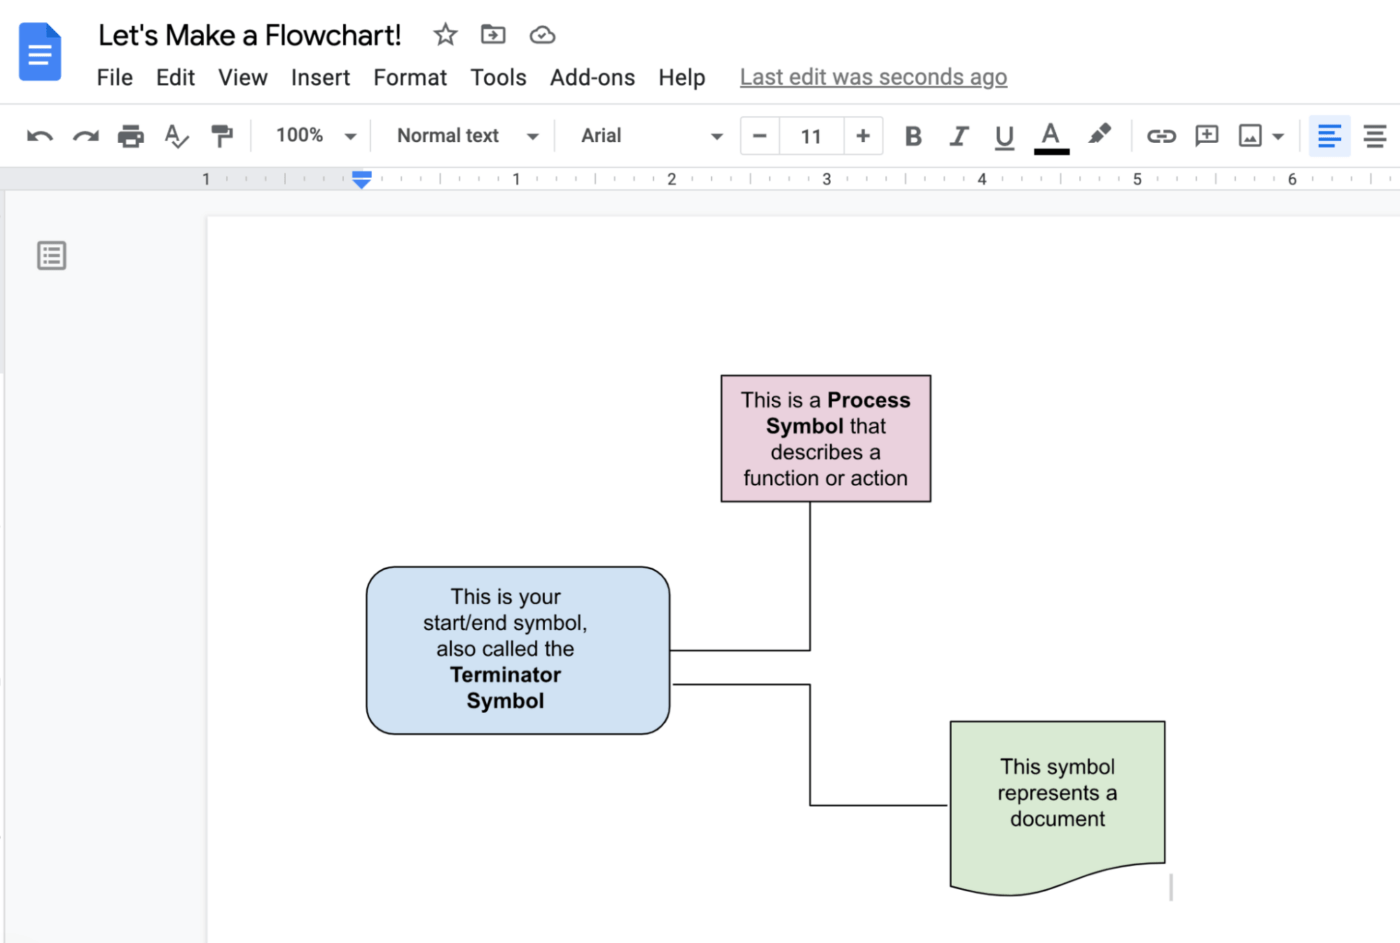 Save your flowchart to view it in Goole Docs